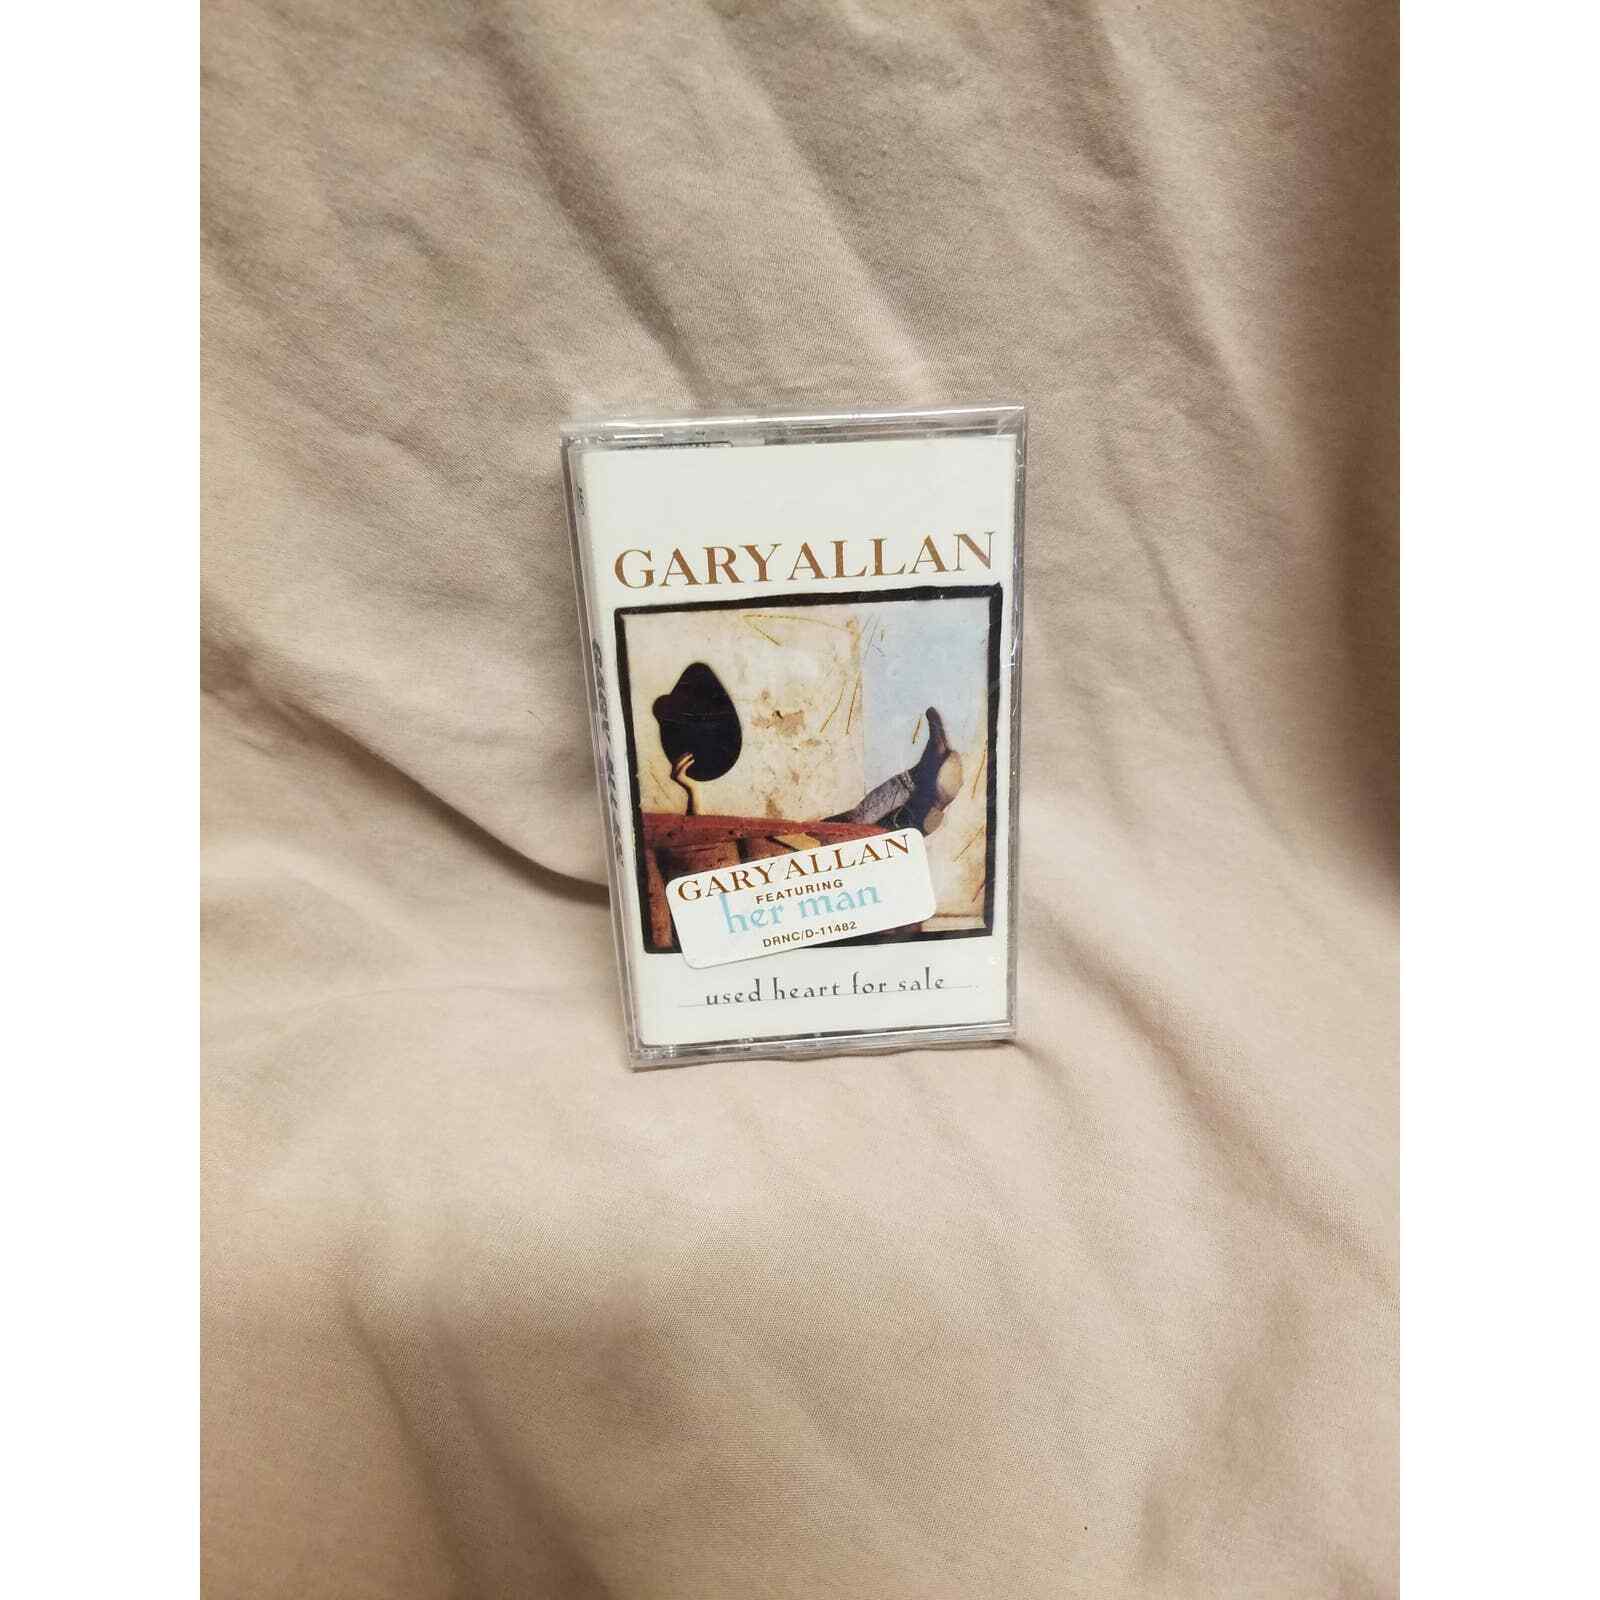 Gary Allan Used Hearts For Sale Featuring Her Man Cassette (1996 Decca Records)